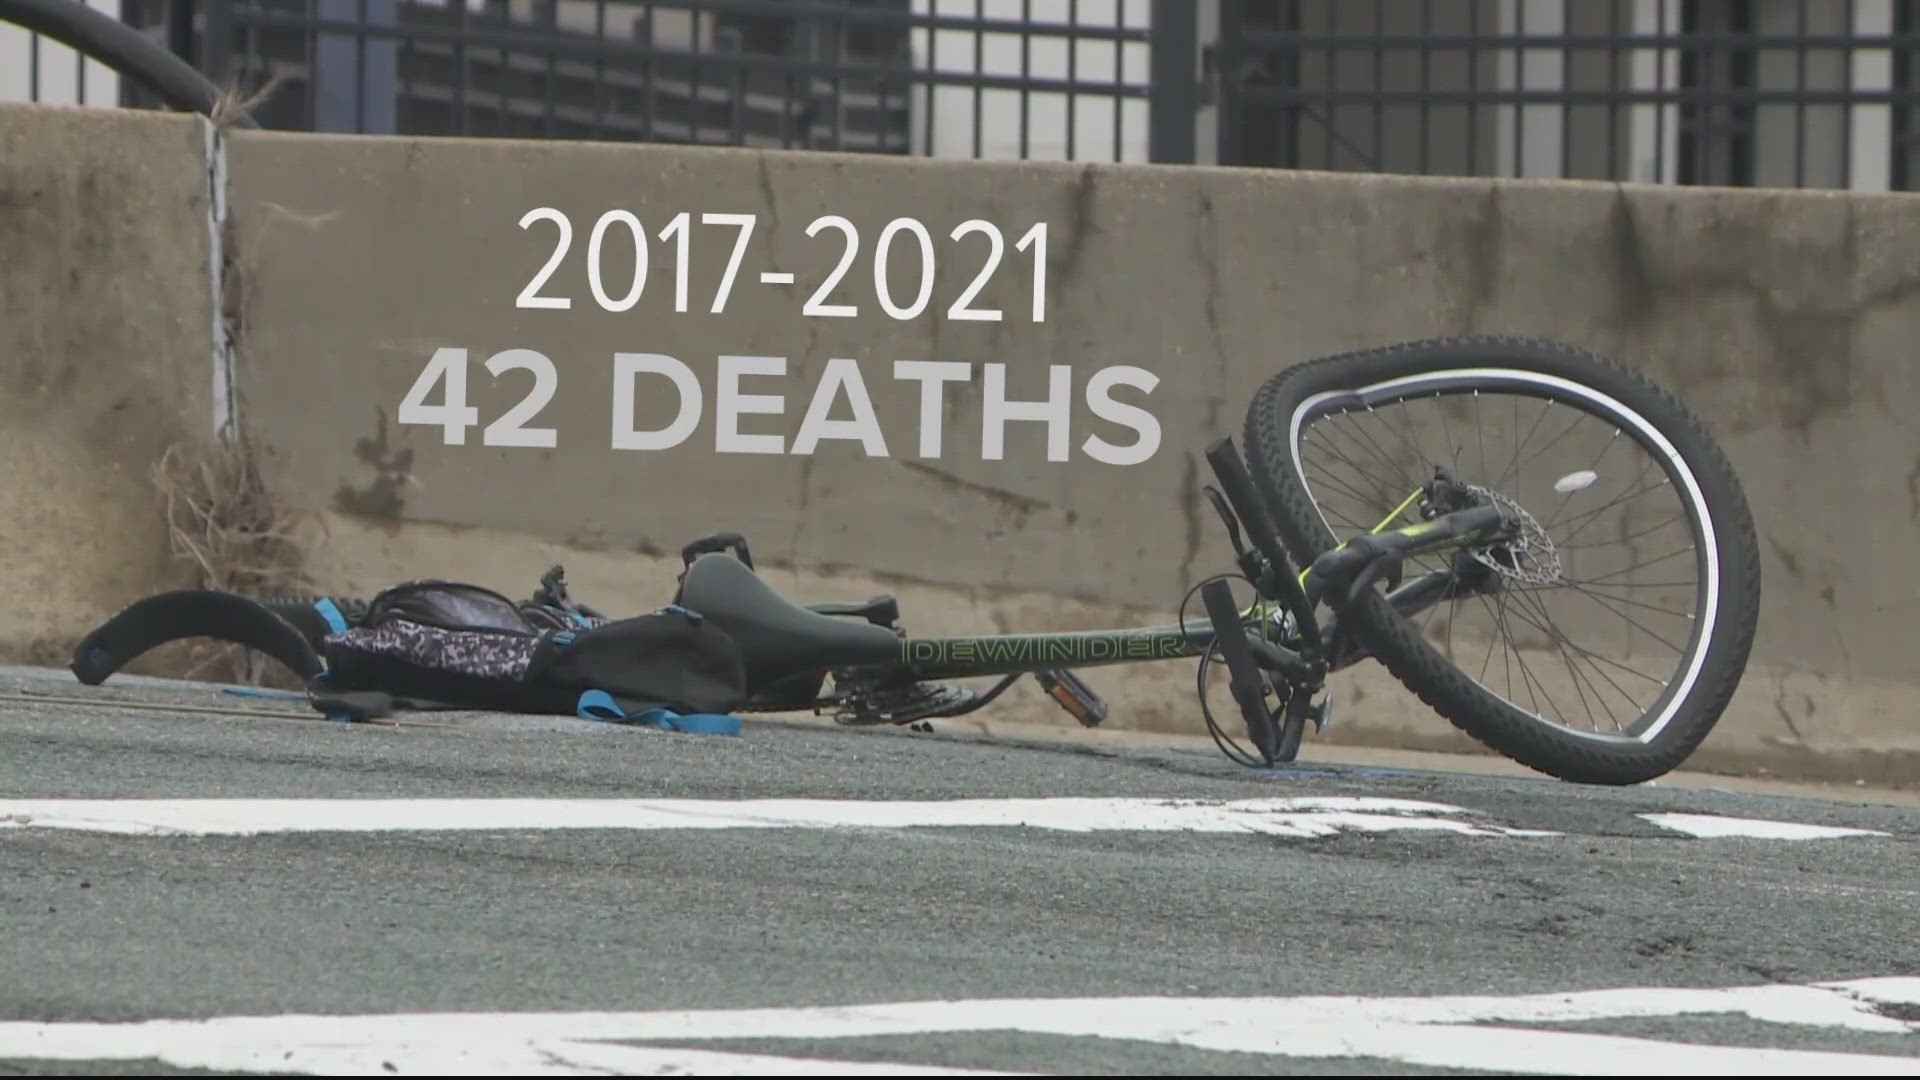 According to data in the report, traffic fatalities have increased every year since Vision Zero's launch except one.